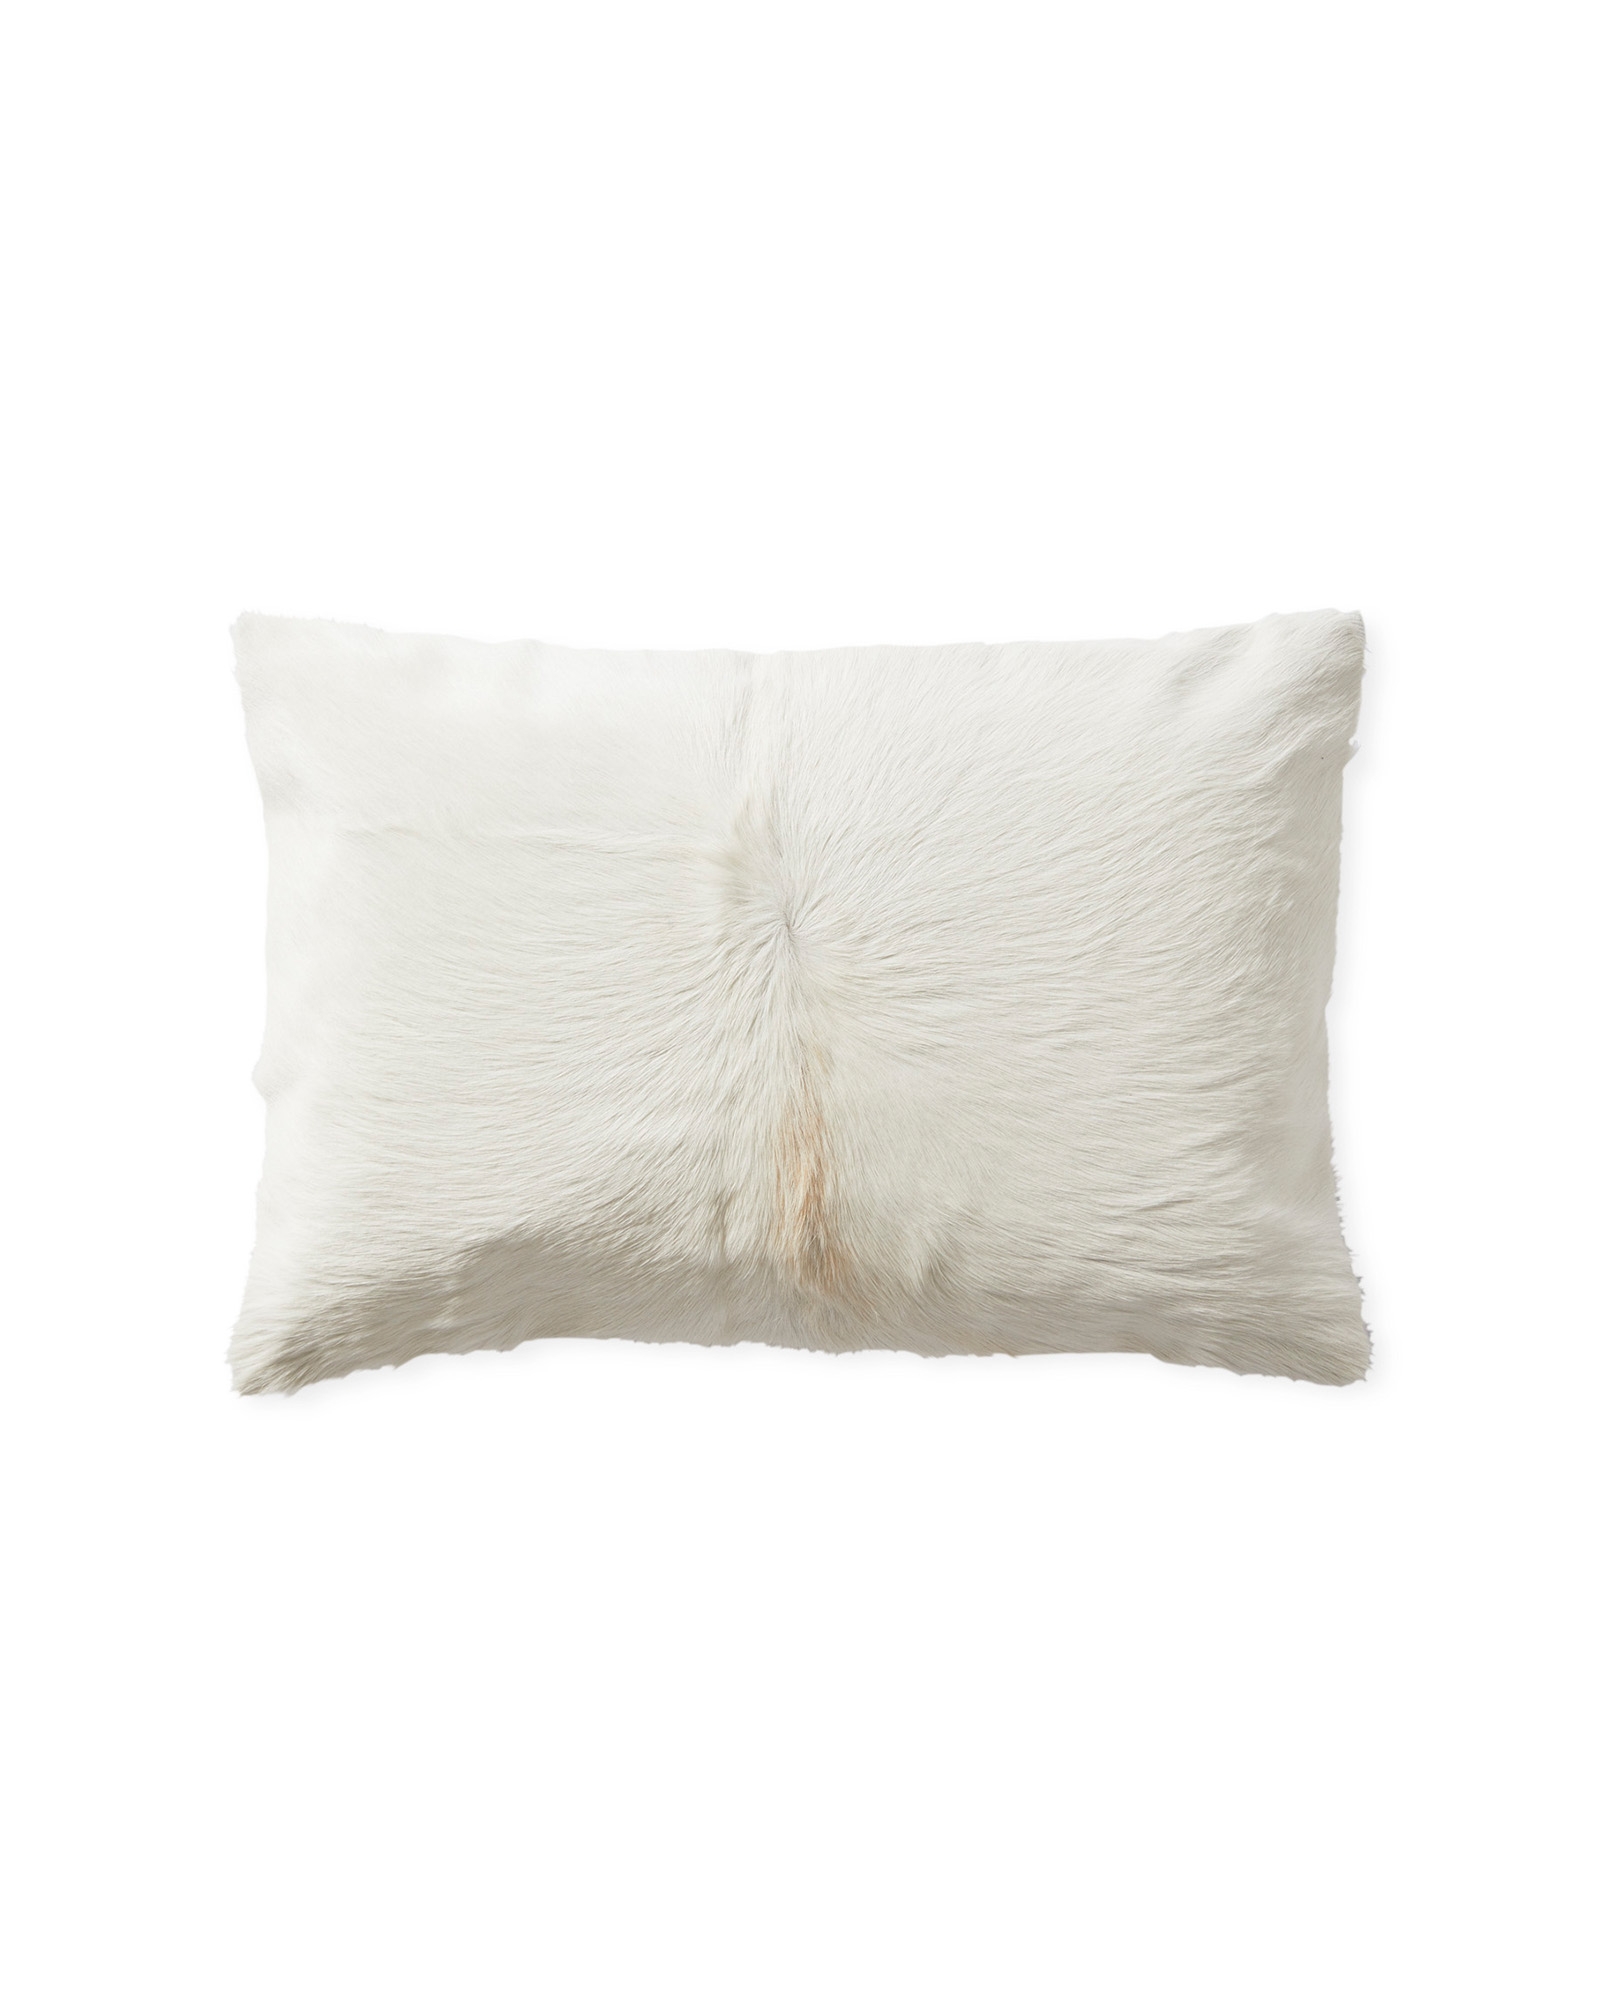 Pluma Hair on Hide Pillow Cover - 12" x 18" - Insert sold separately - Image 0